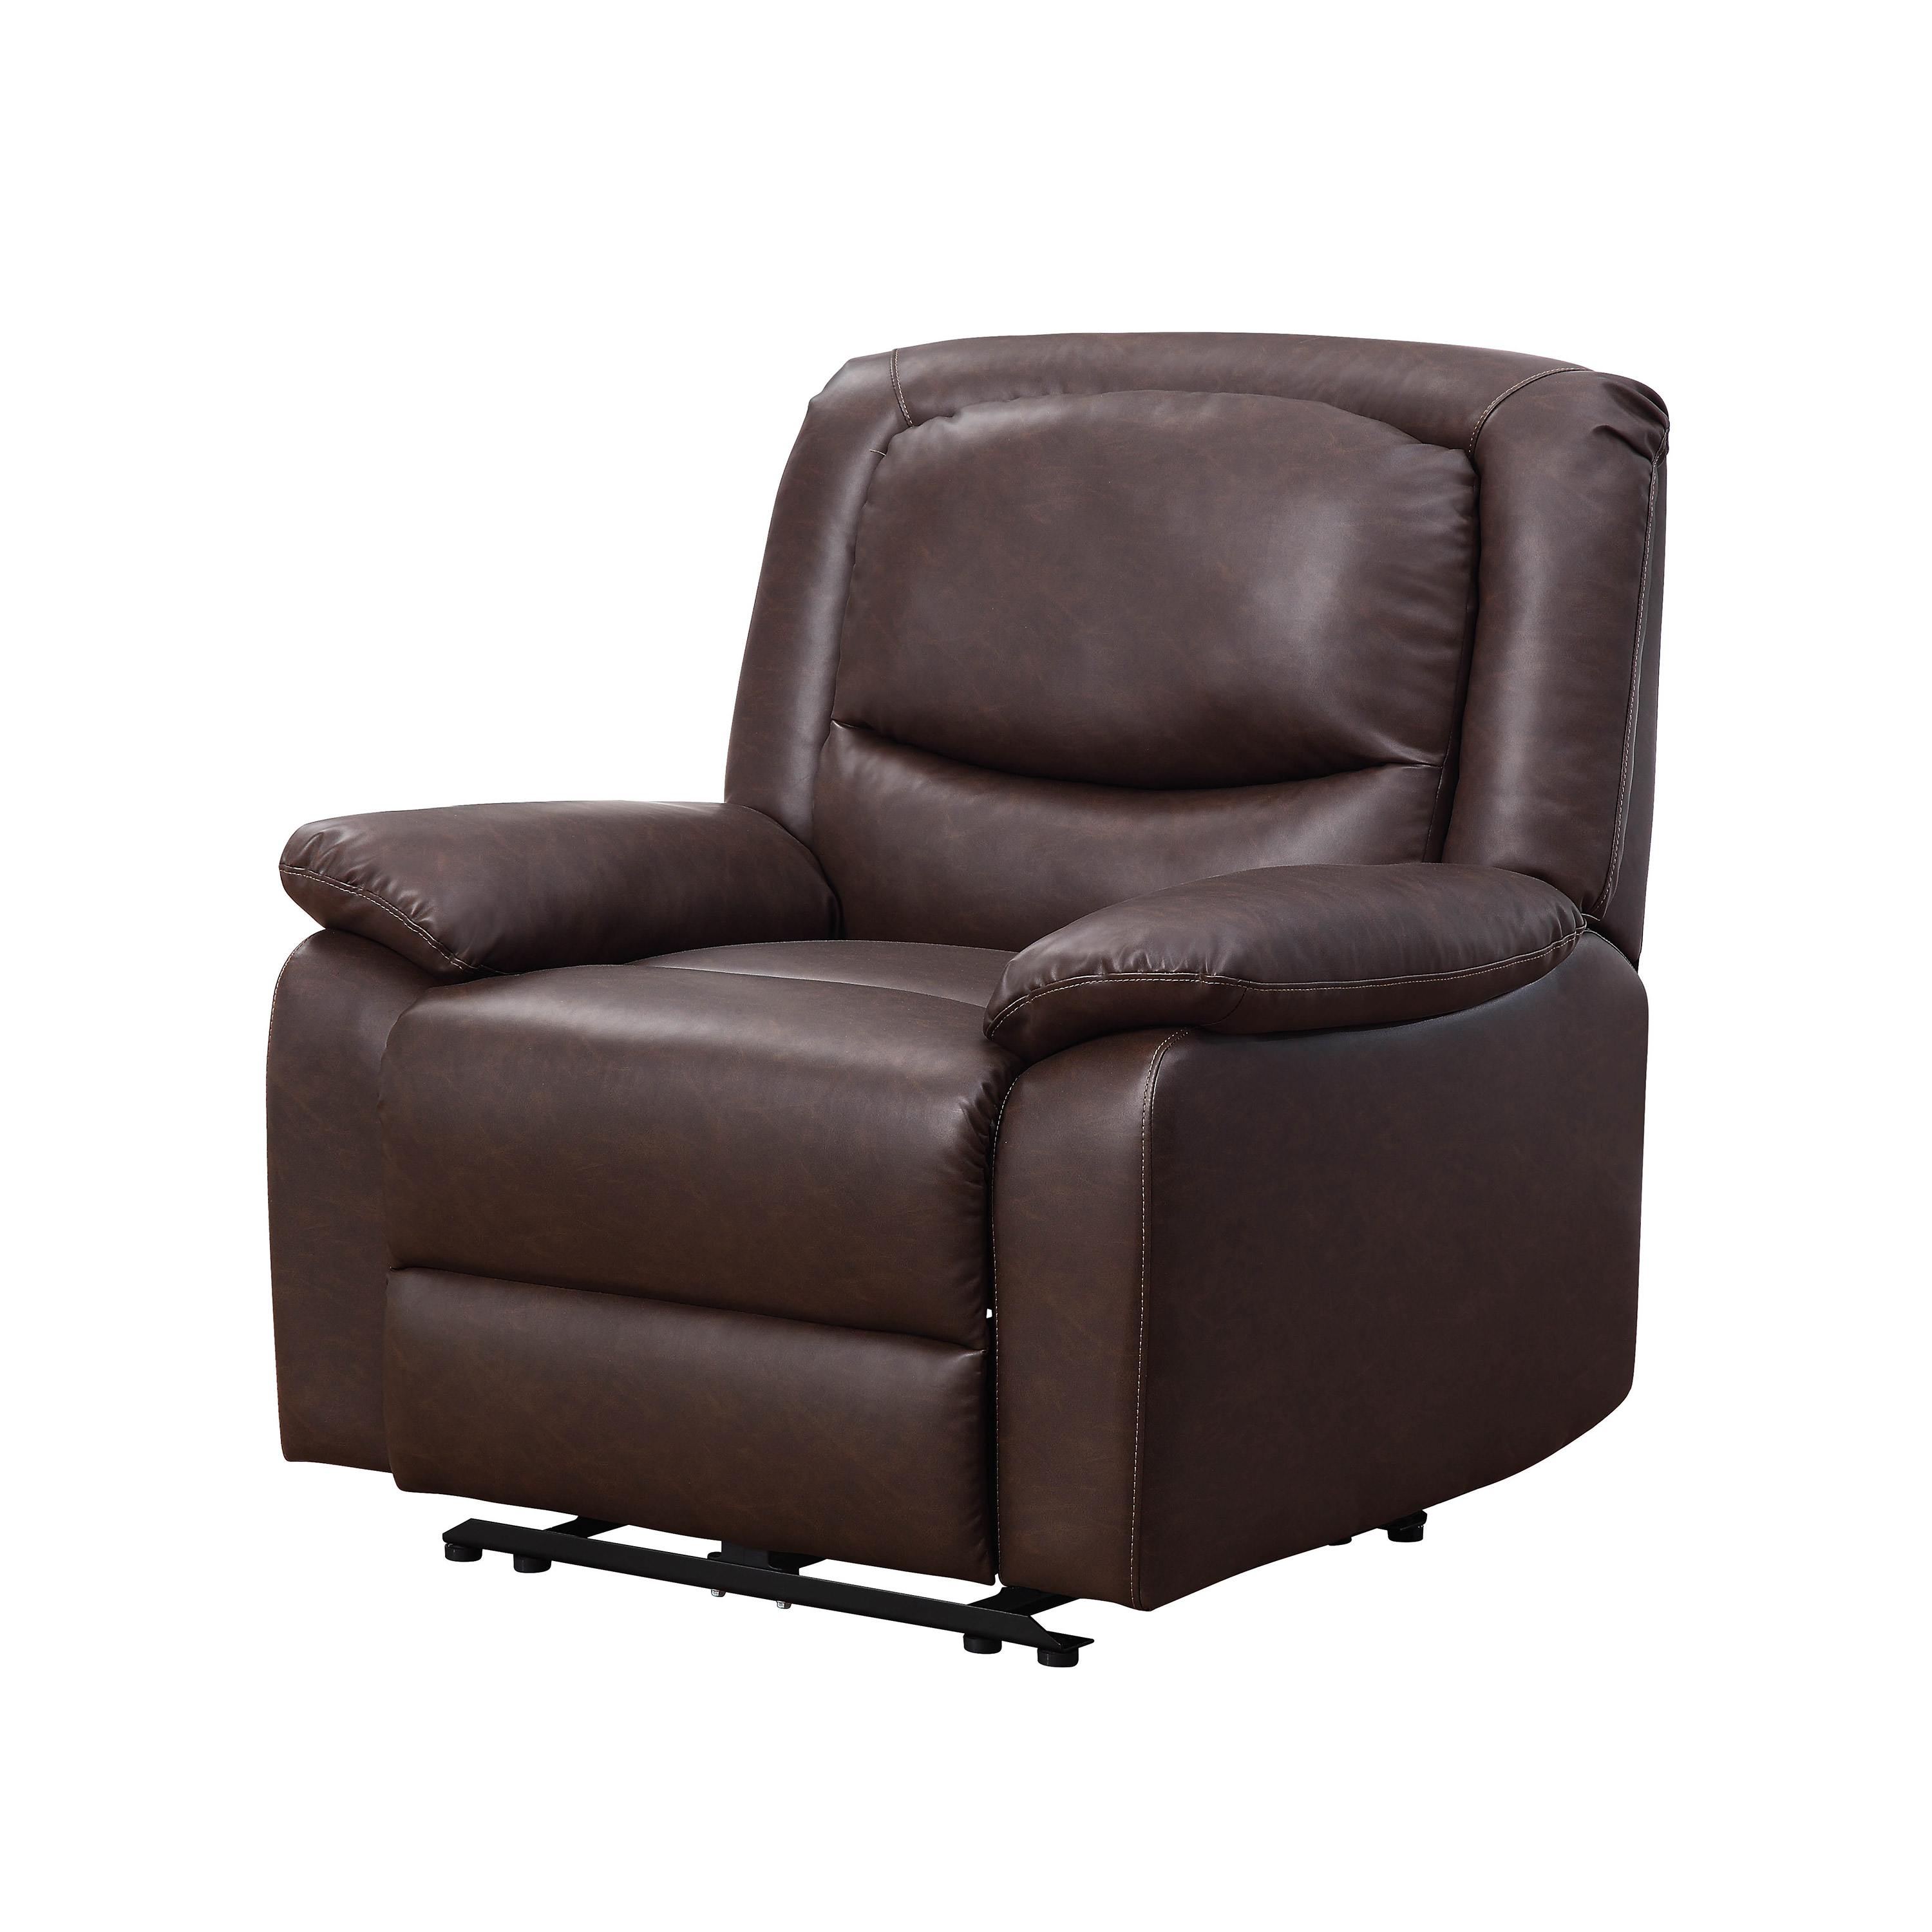 Serta Push-Button Power Recliner with Deep Body Cushions, Brown Faux Leather Upholstery - image 6 of 9